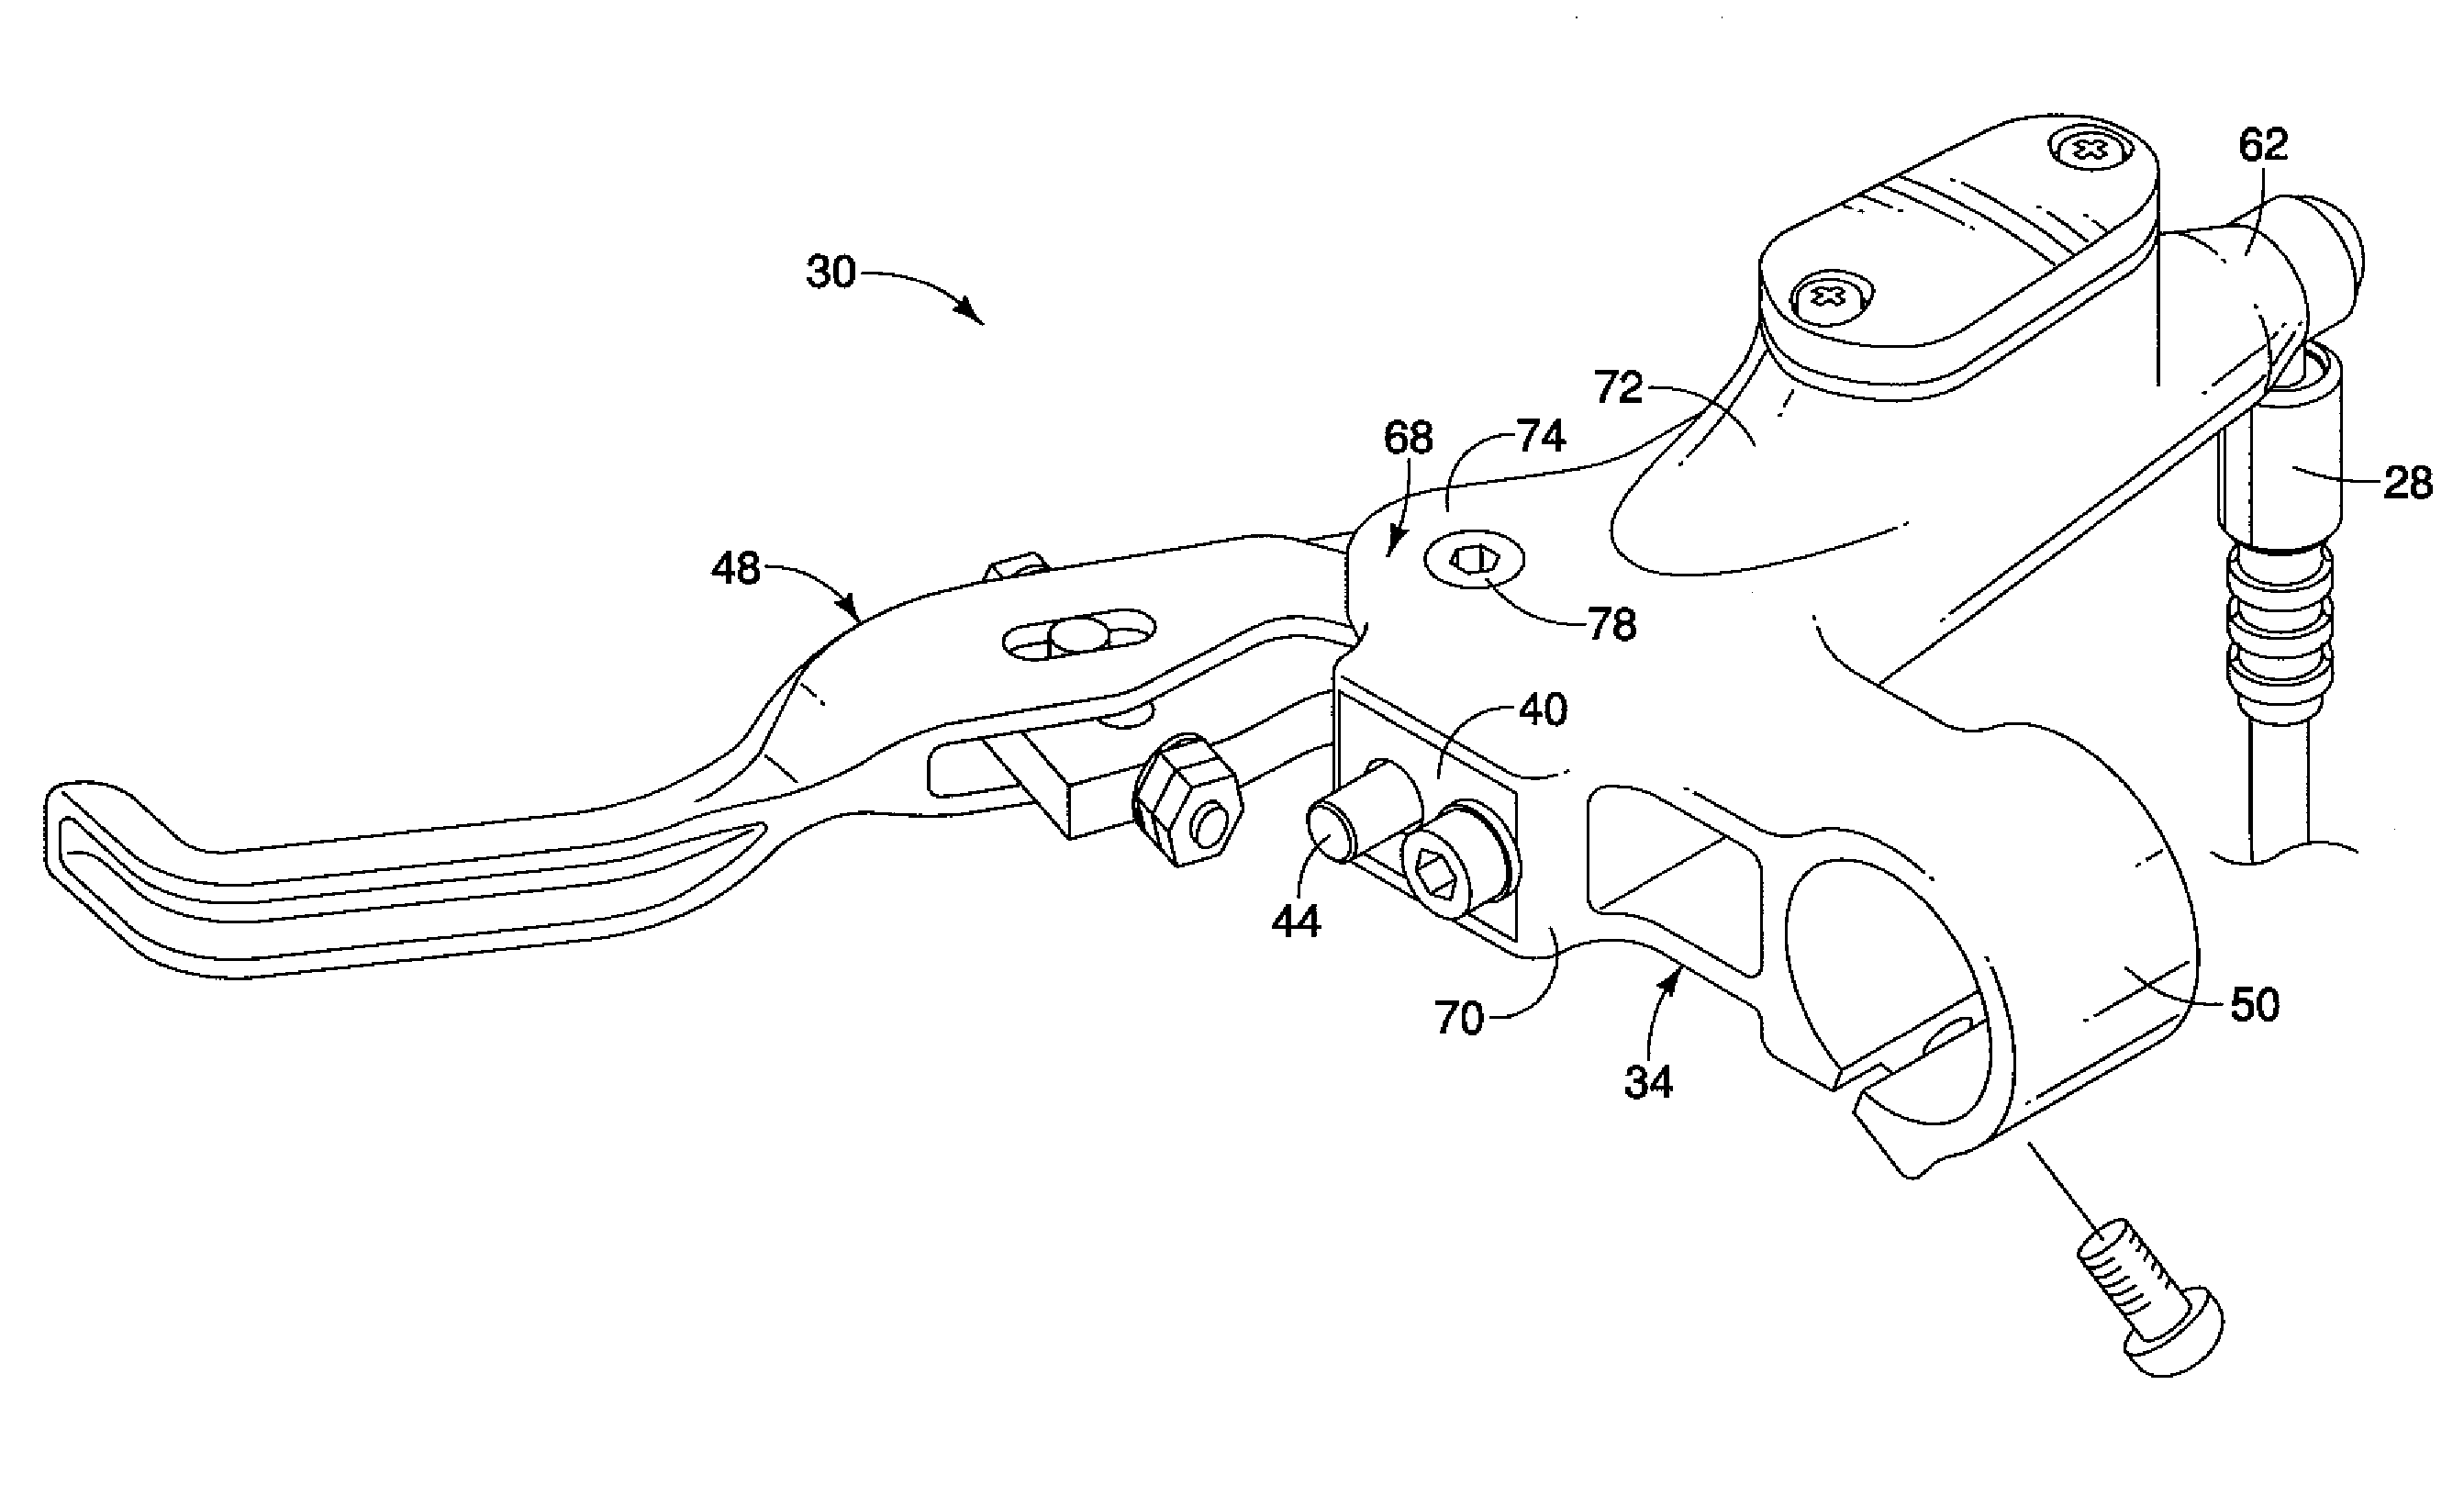 Bicycle hydraulic brake actuation device